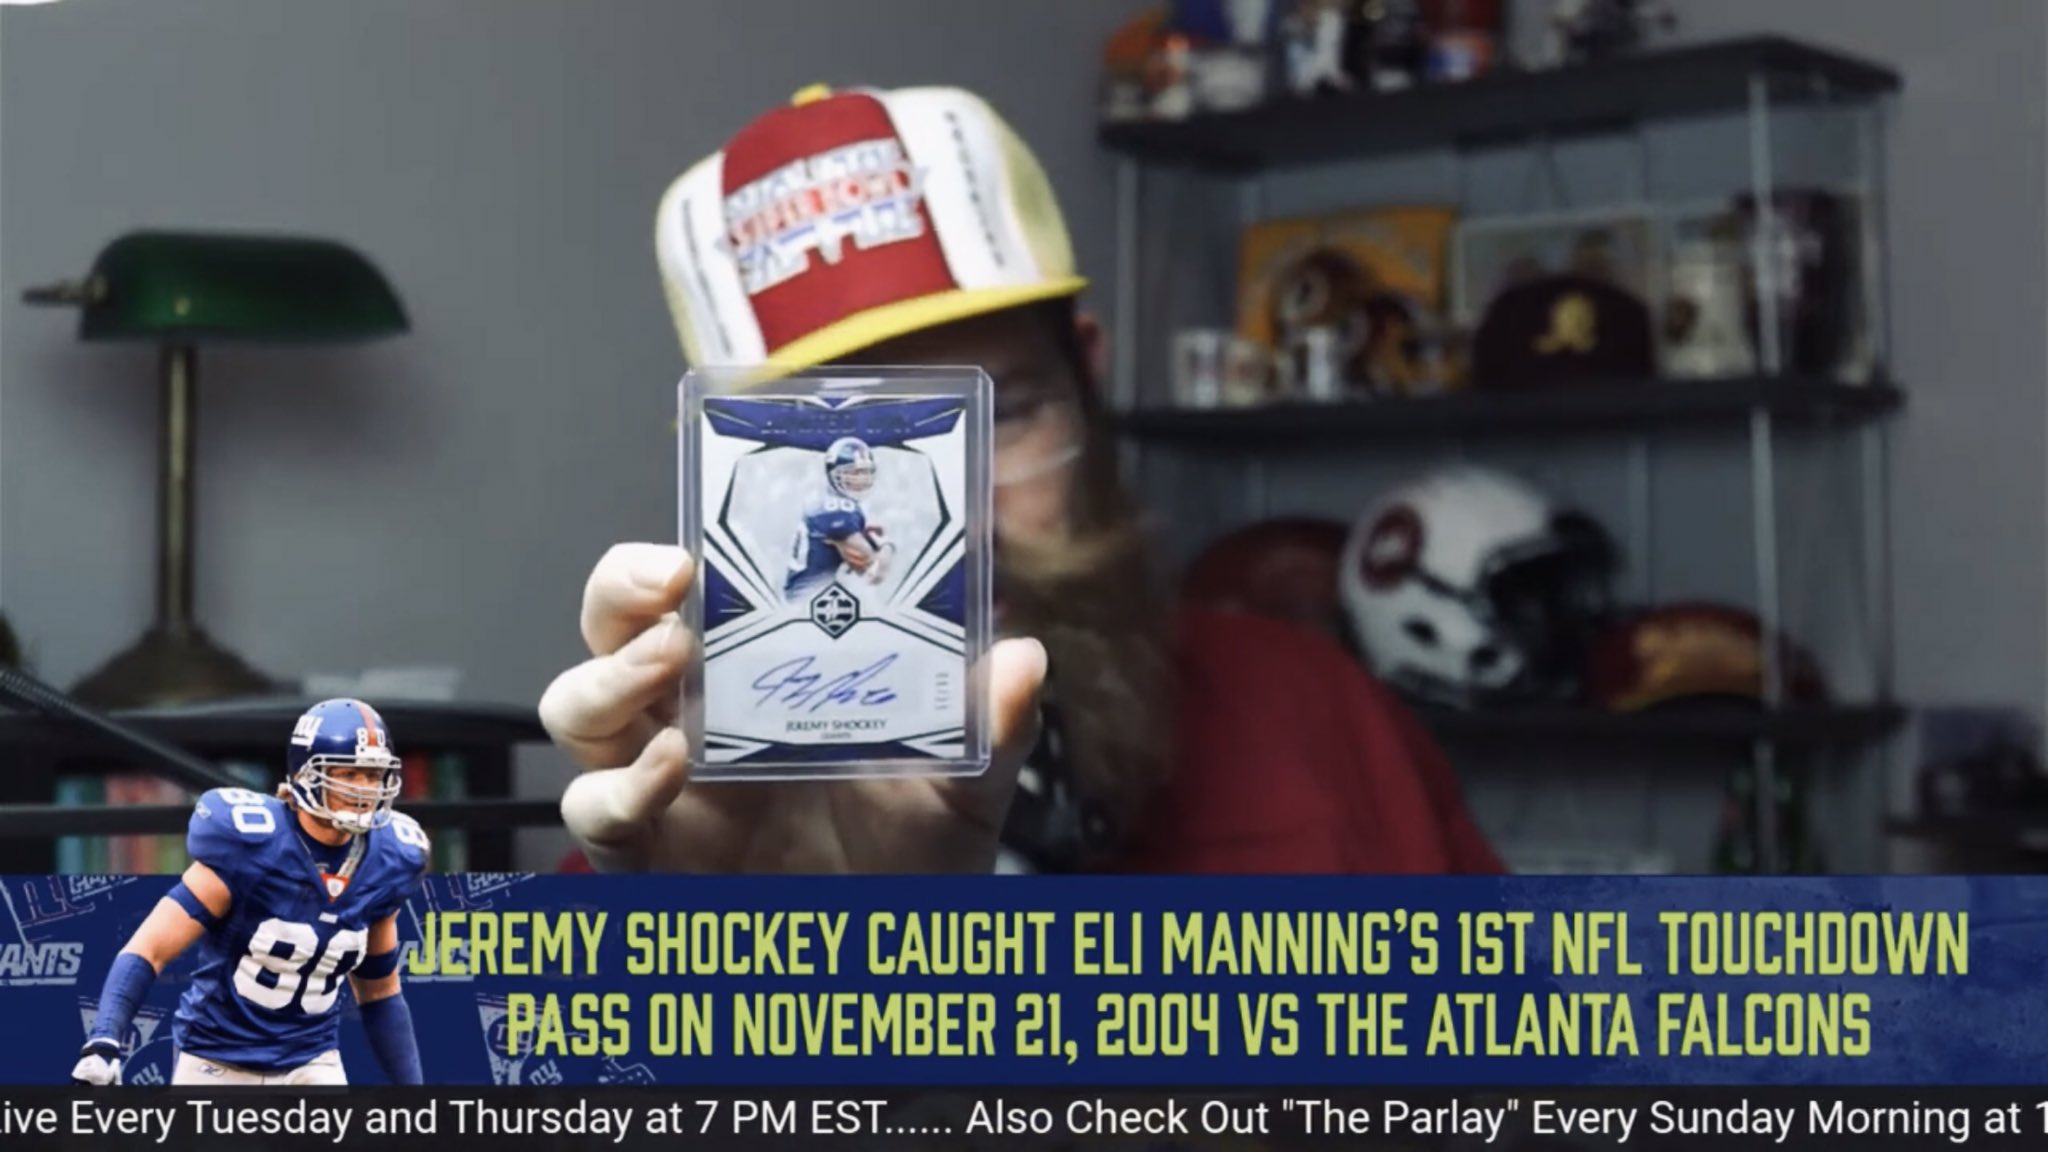 awthentik on X: 'Just about to give away this Jeremy Shockey